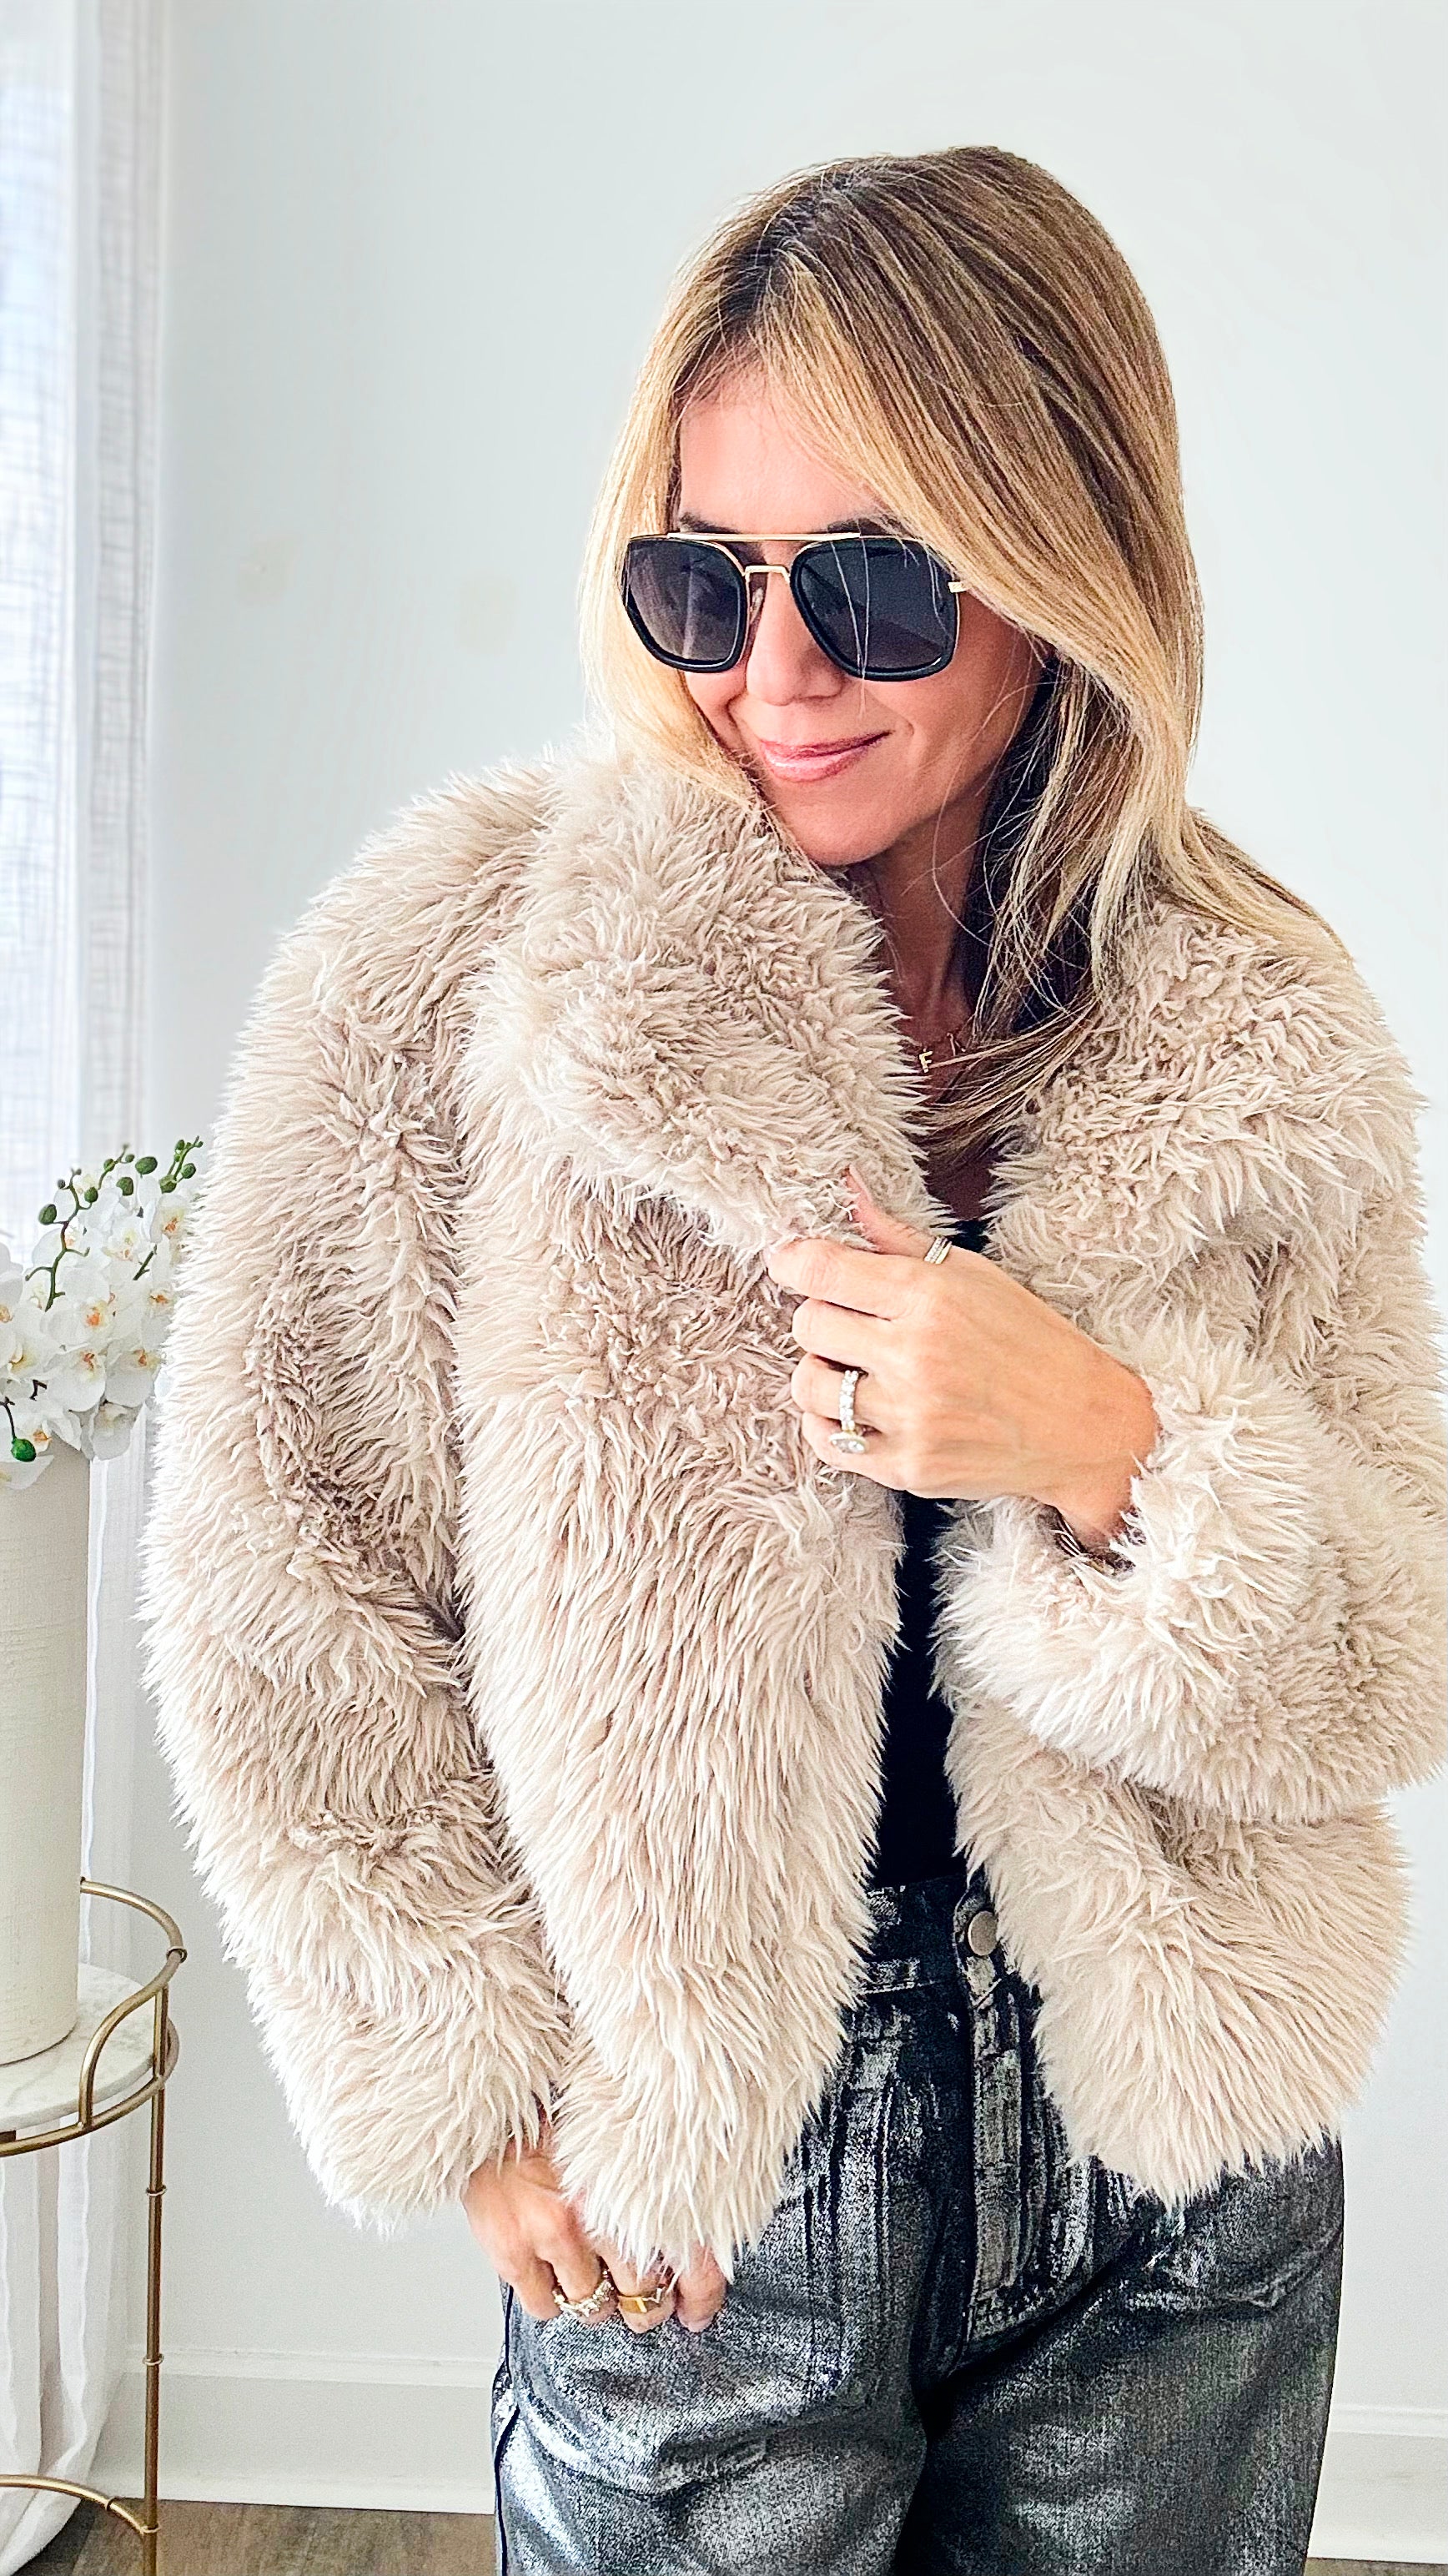 City Slick Faux Fur Coat - Tan-160 Jackets-Love Tree Fashion-Coastal Bloom Boutique, find the trendiest versions of the popular styles and looks Located in Indialantic, FL